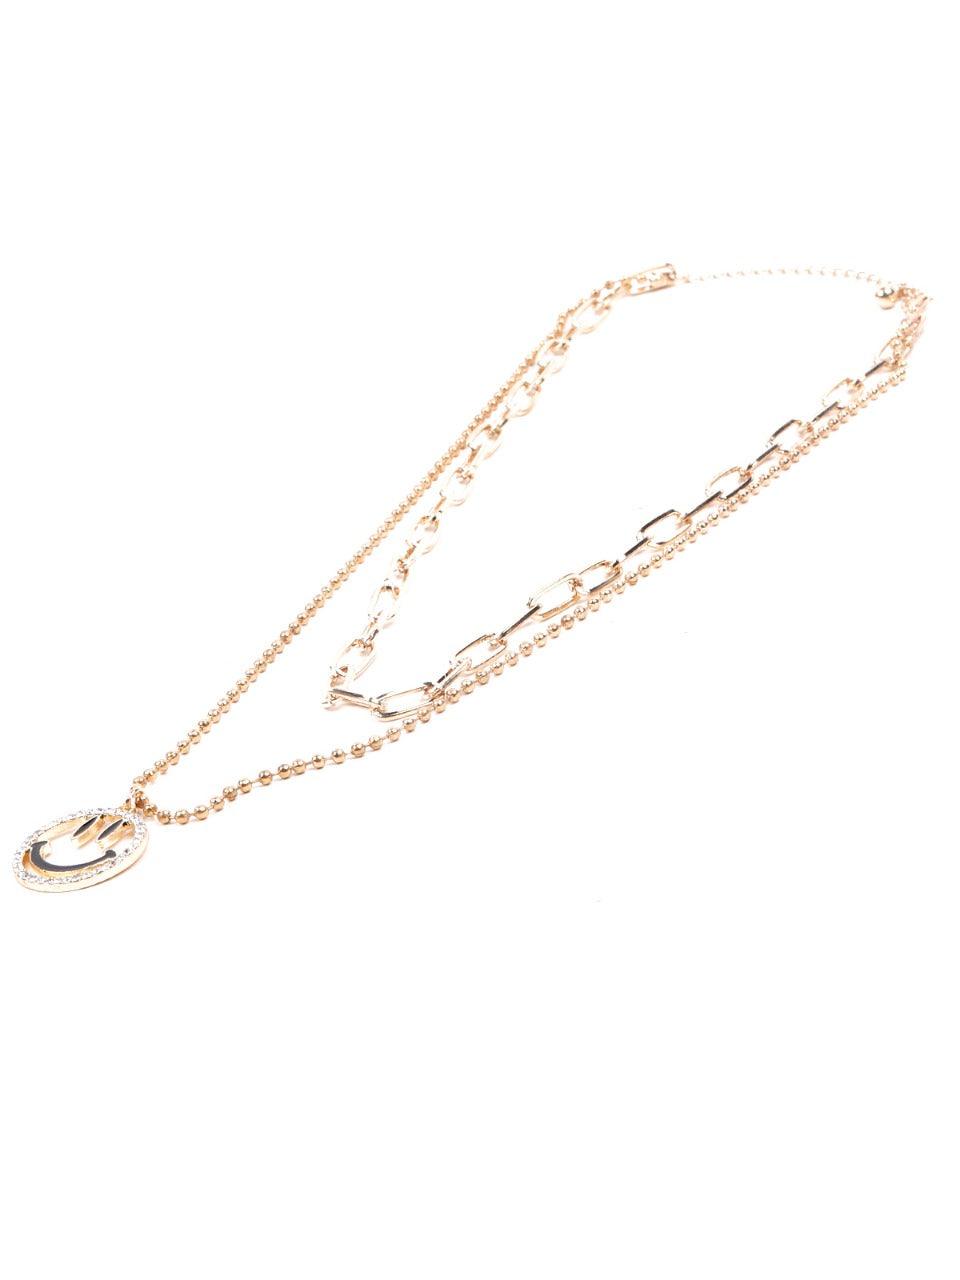 Women's Cute Smiley Layered Chain Necklace - Gold - Odette